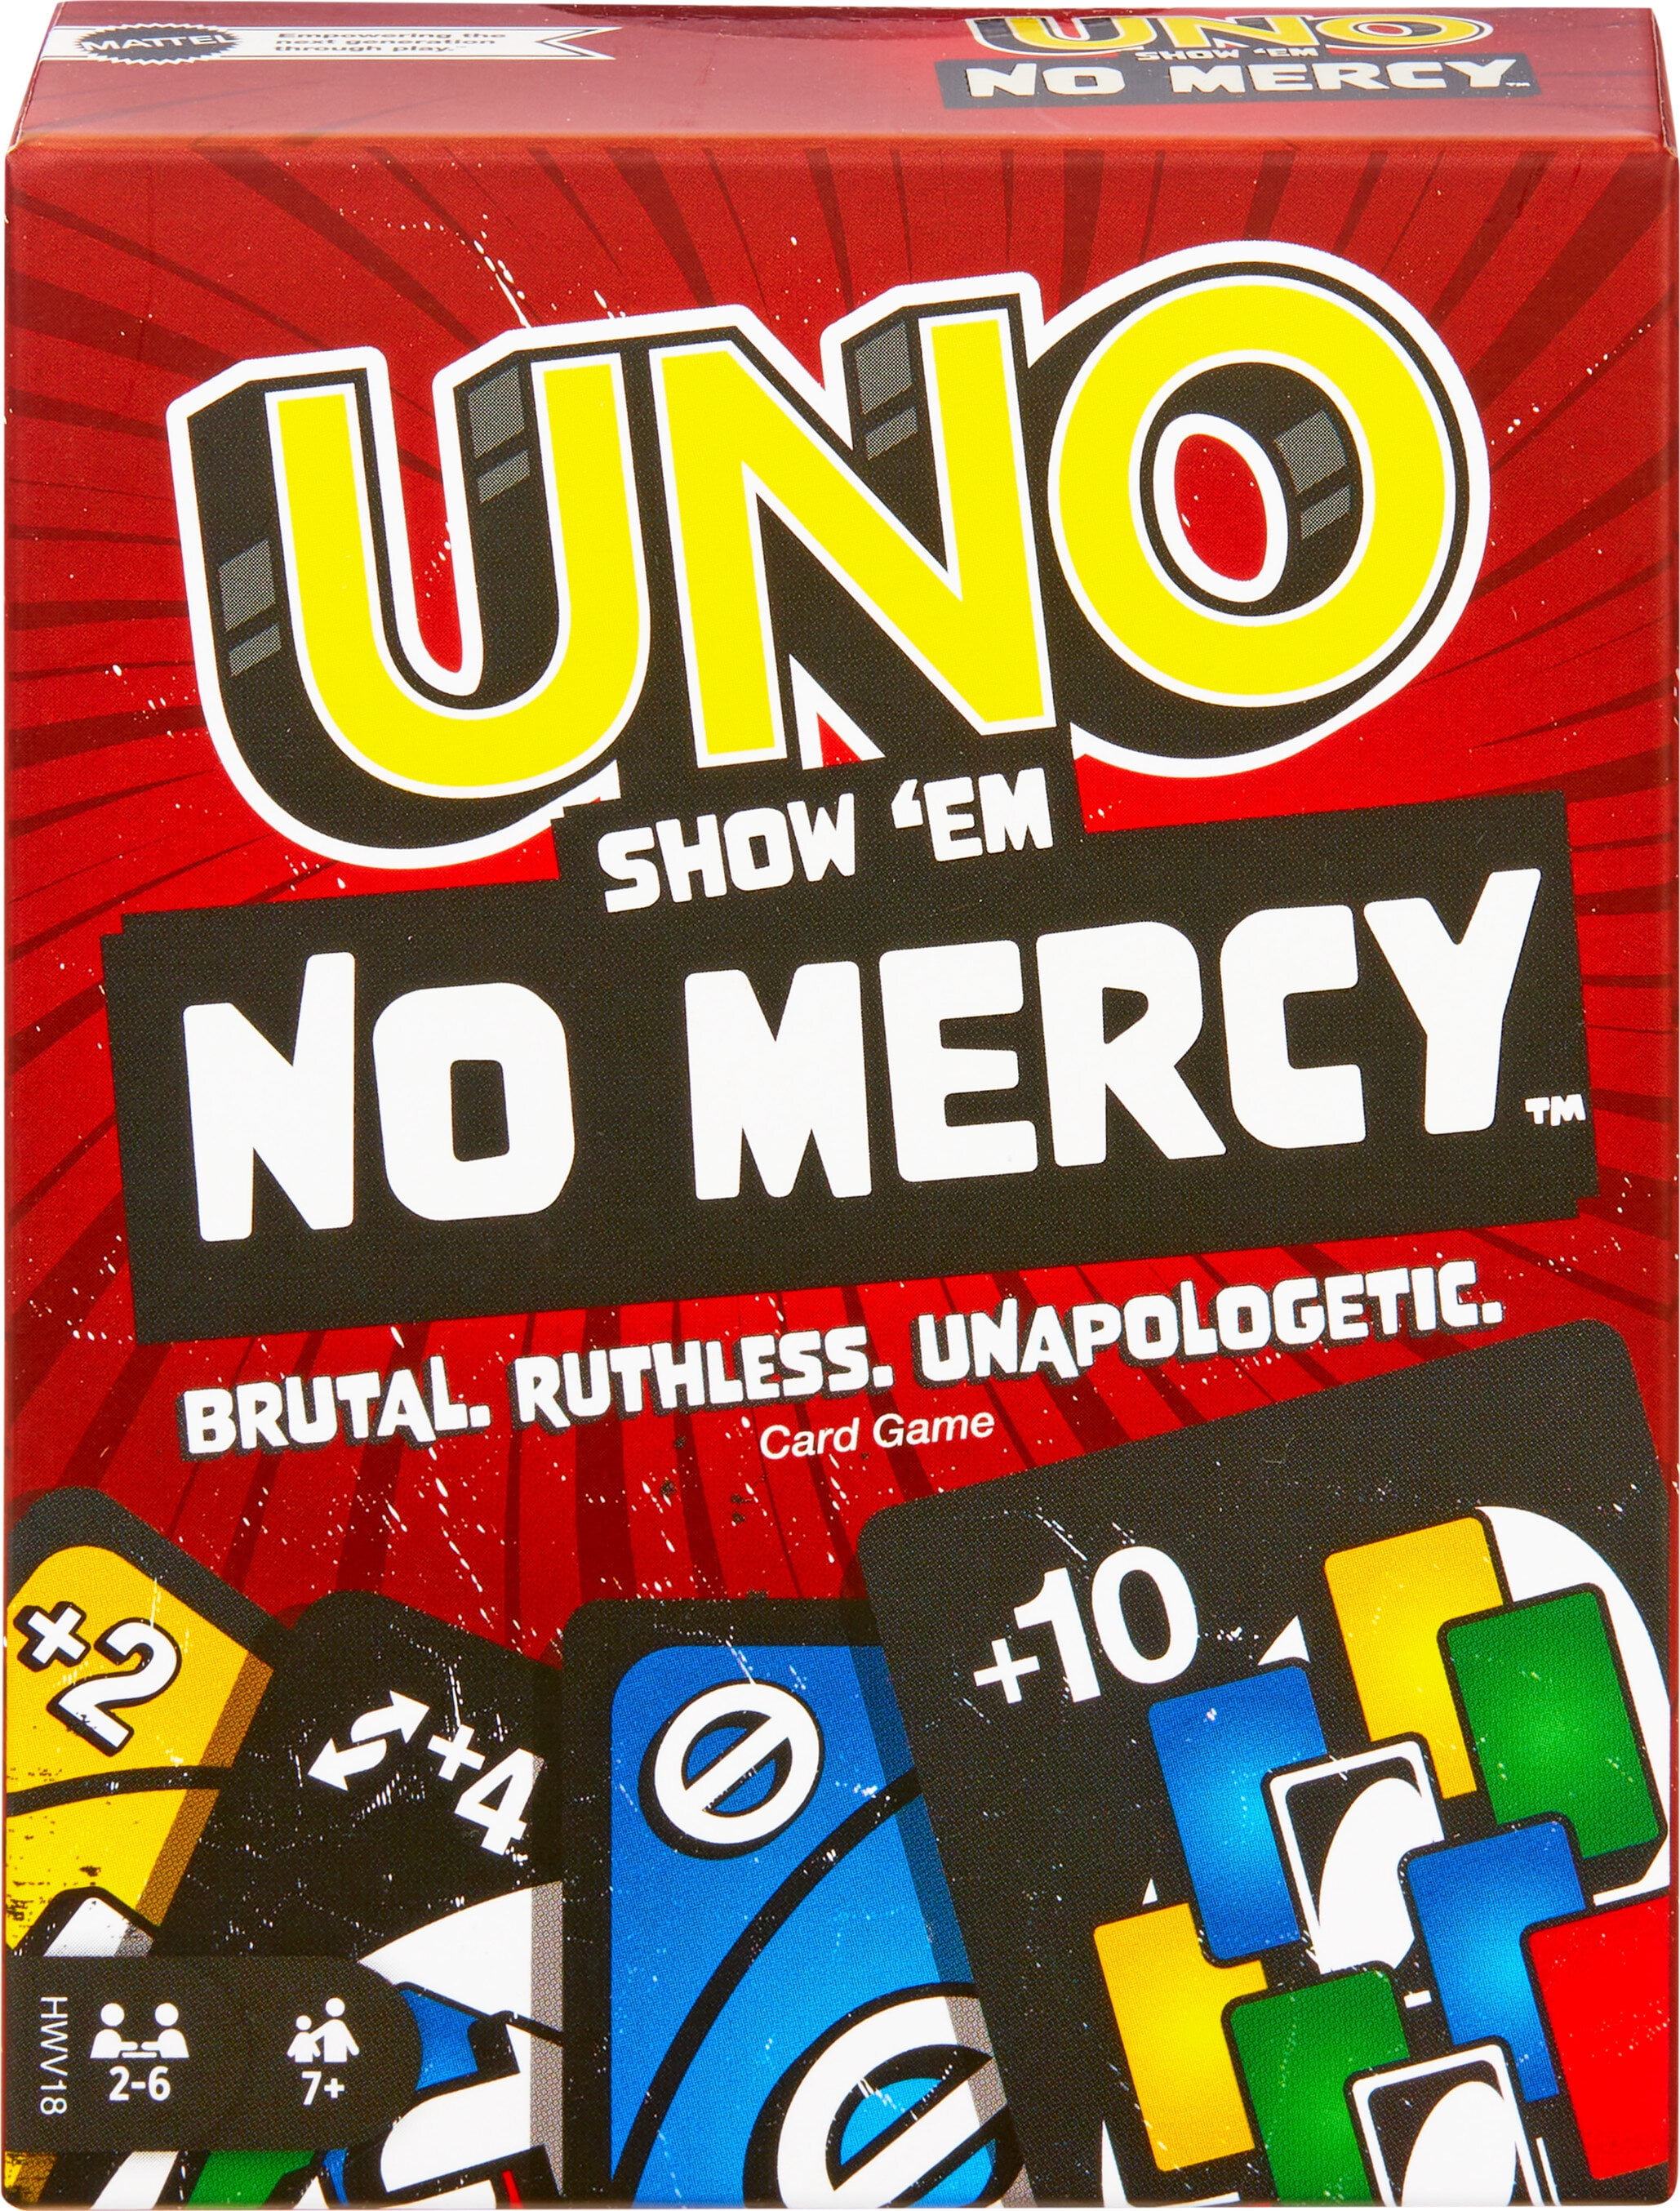 UNO Show ‘em No Mercy Card Game for Kids, Adults & Family Night ...